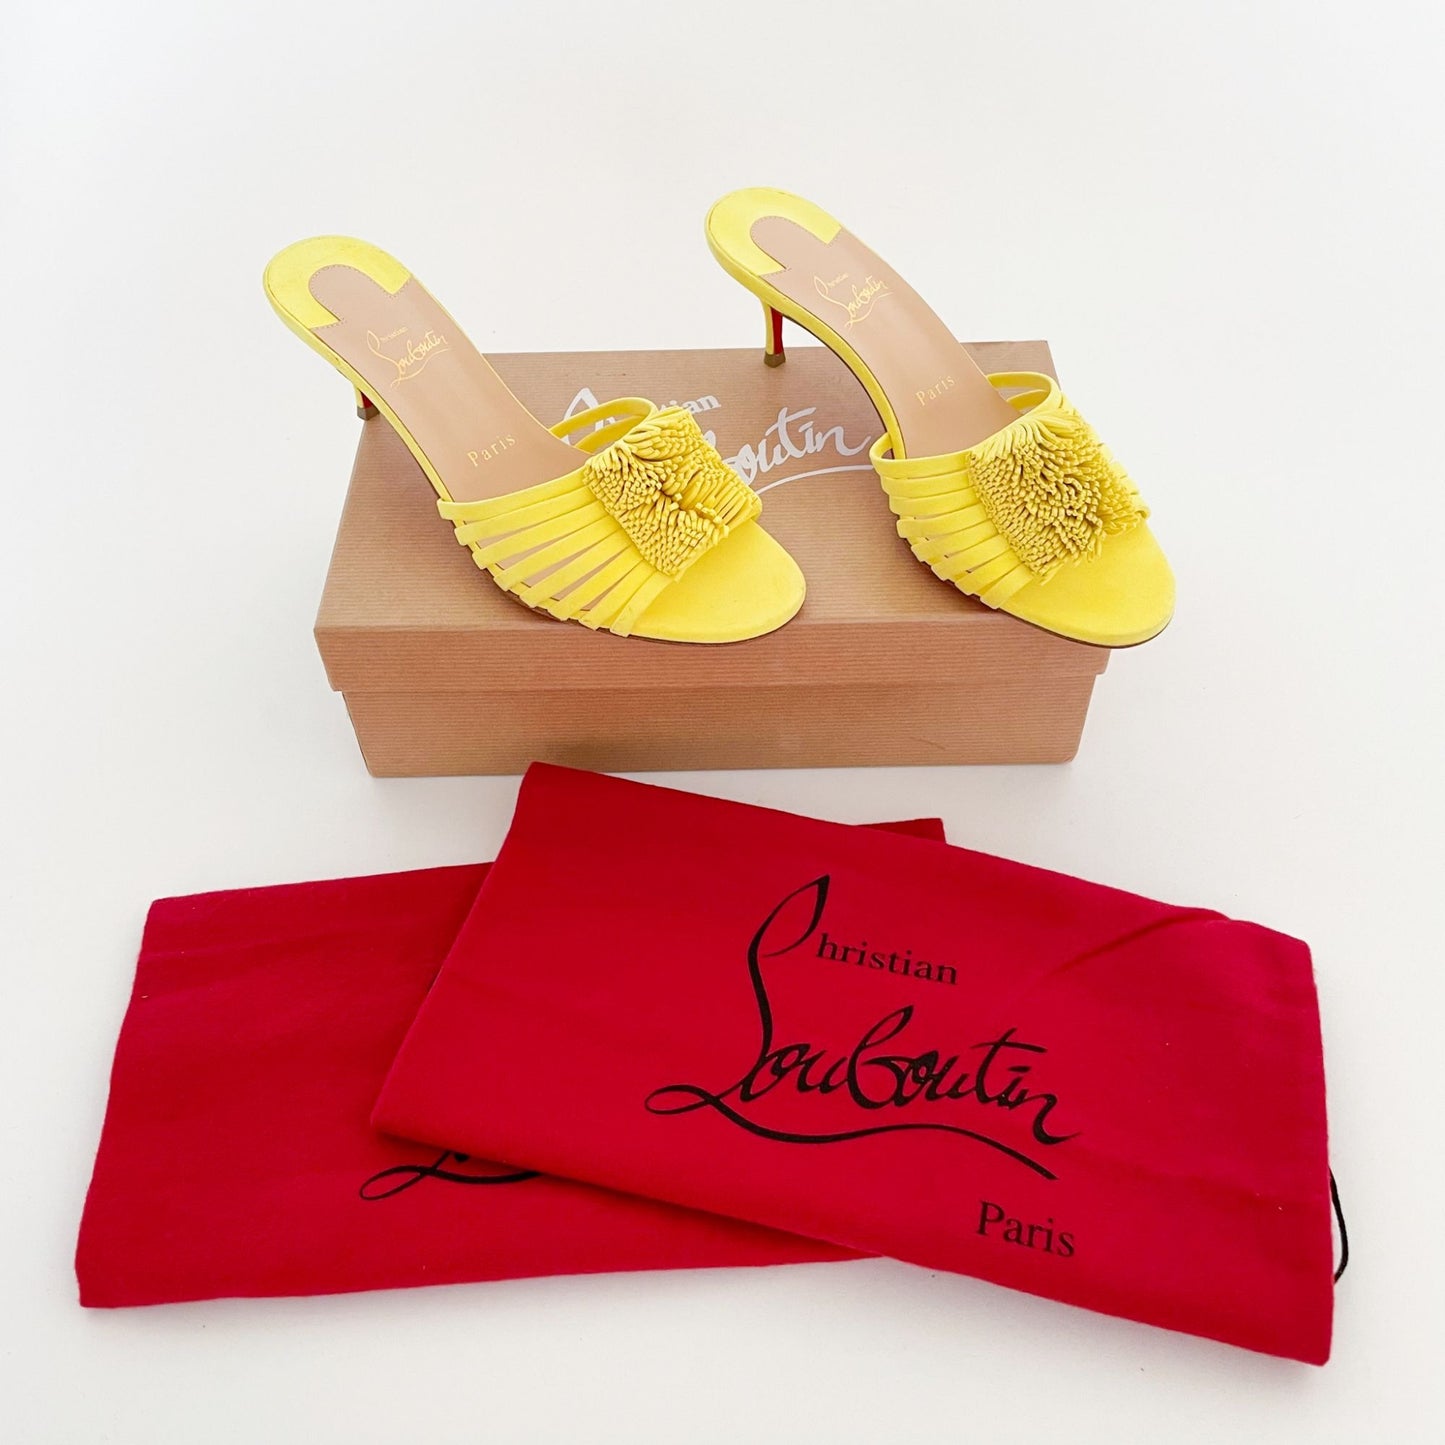 Christian Louboutin Belbrossa SS in Citronnade Suede Size 38.5